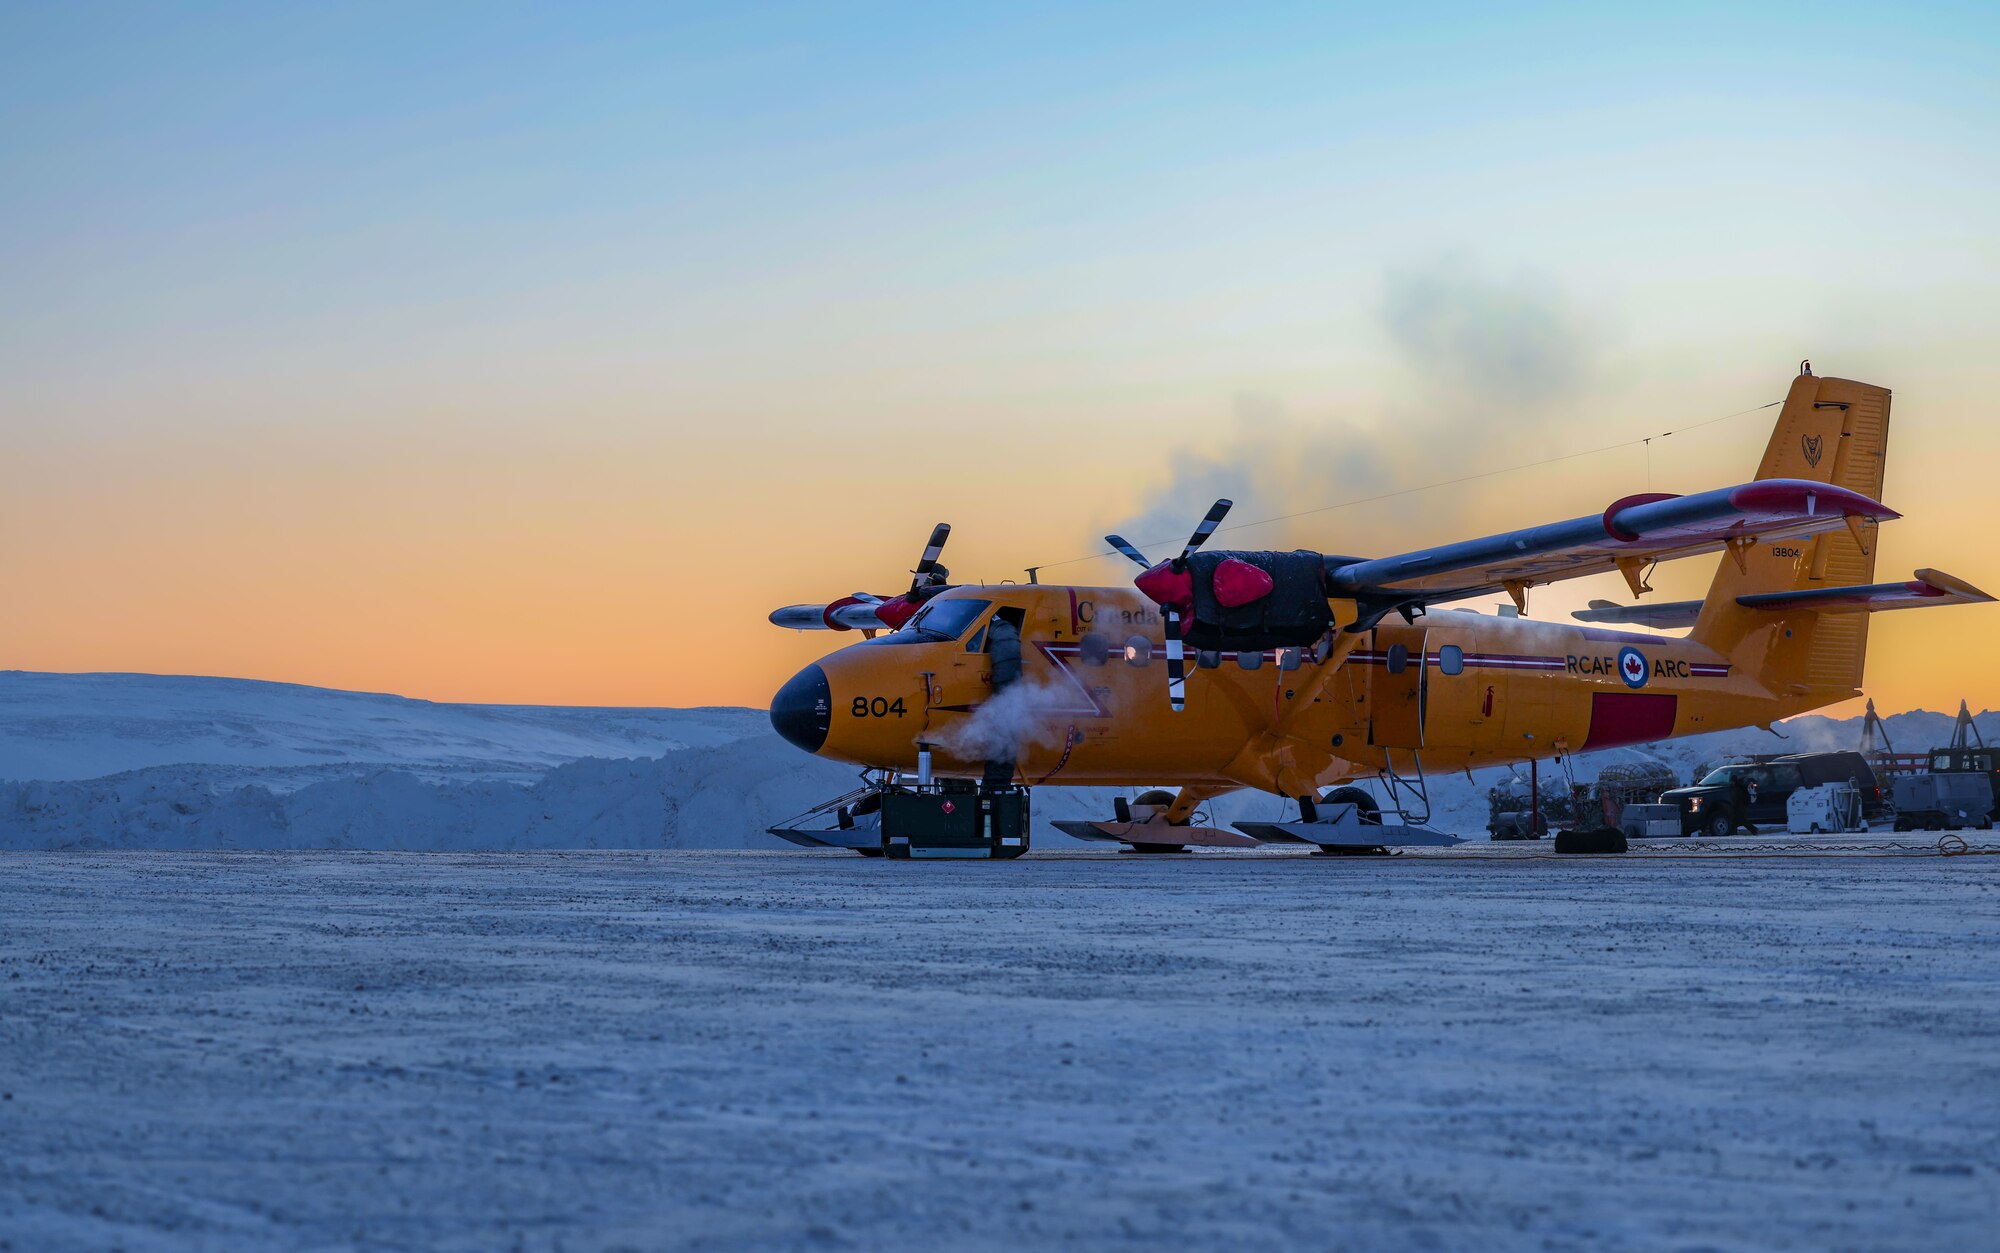 De Havilland Canada CC-138 “Twin Otter” aircraft from the 440 Transport Squadron, Royal Canadian Armed Forces, sits at the landing area at Resolute Bay, Nunavut, Canada Feb. 25, 2023.